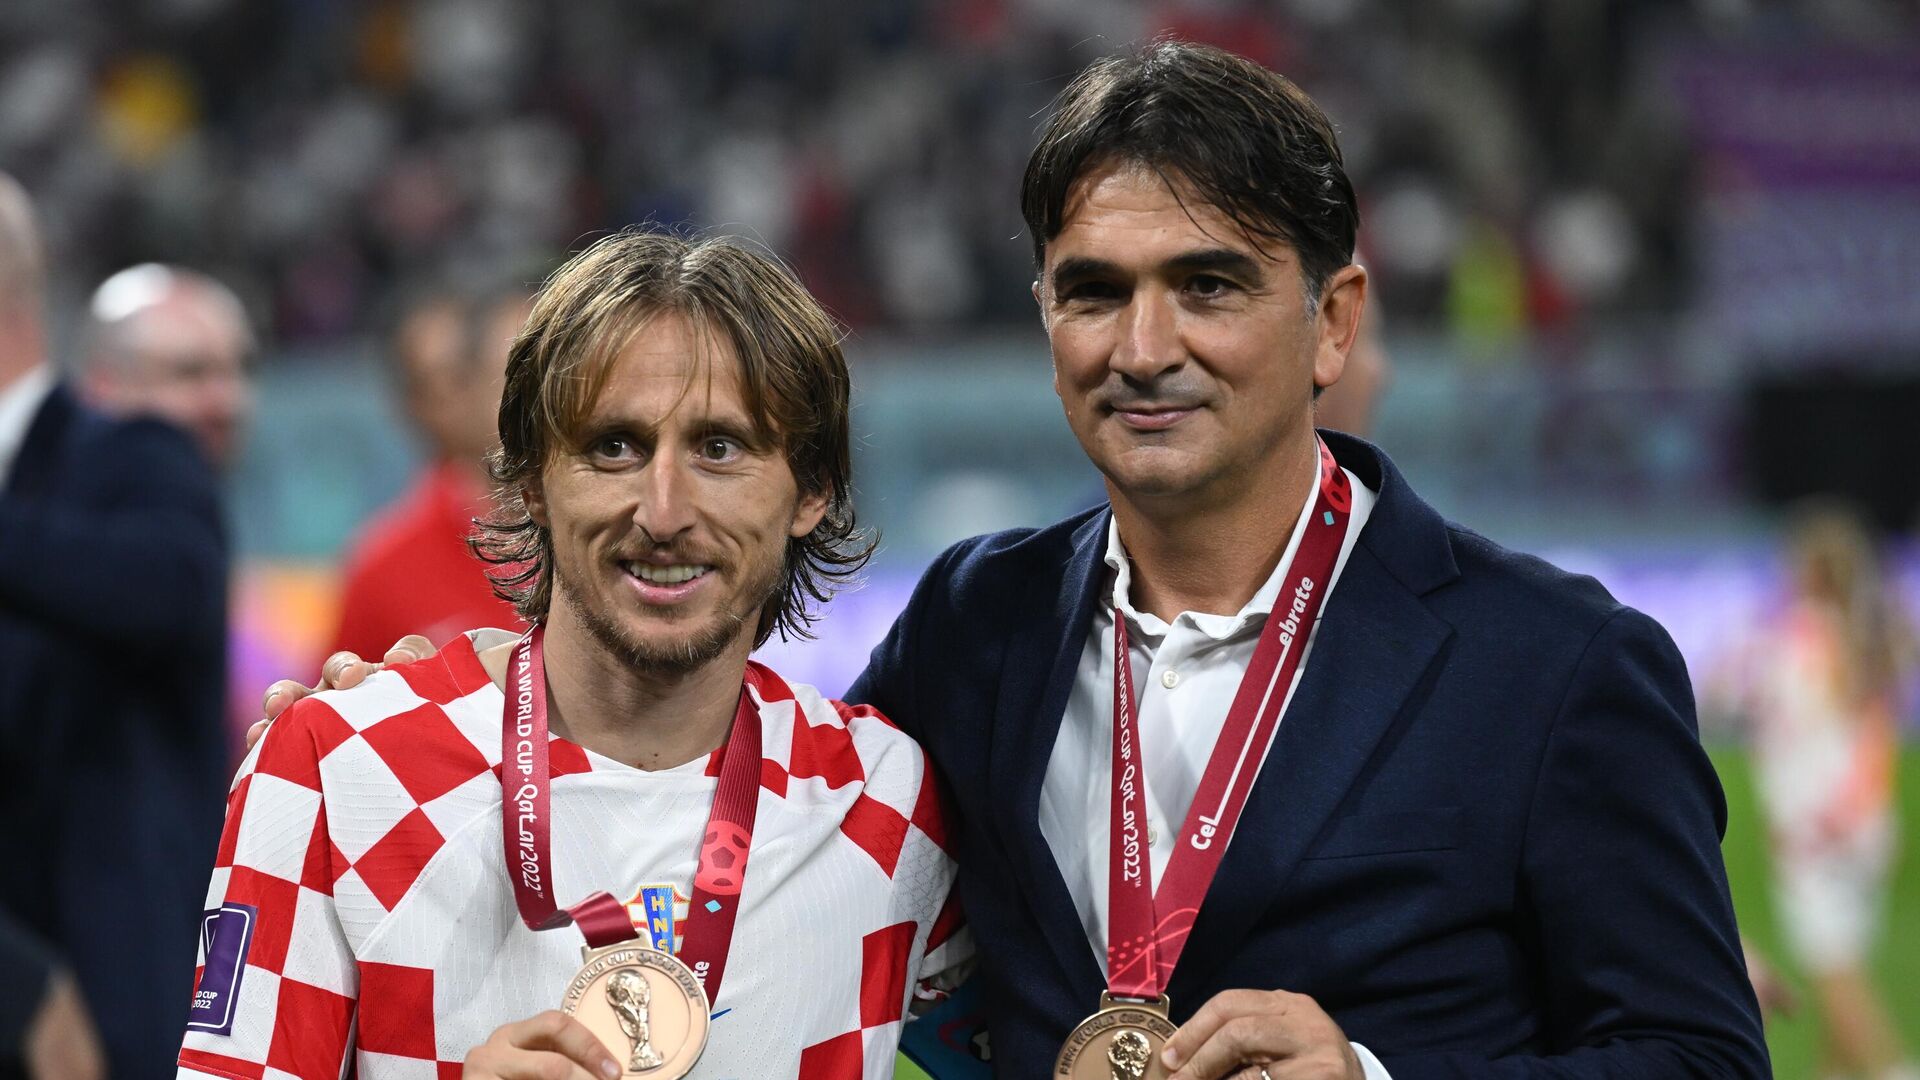 Modric made statements about his future in the national team.